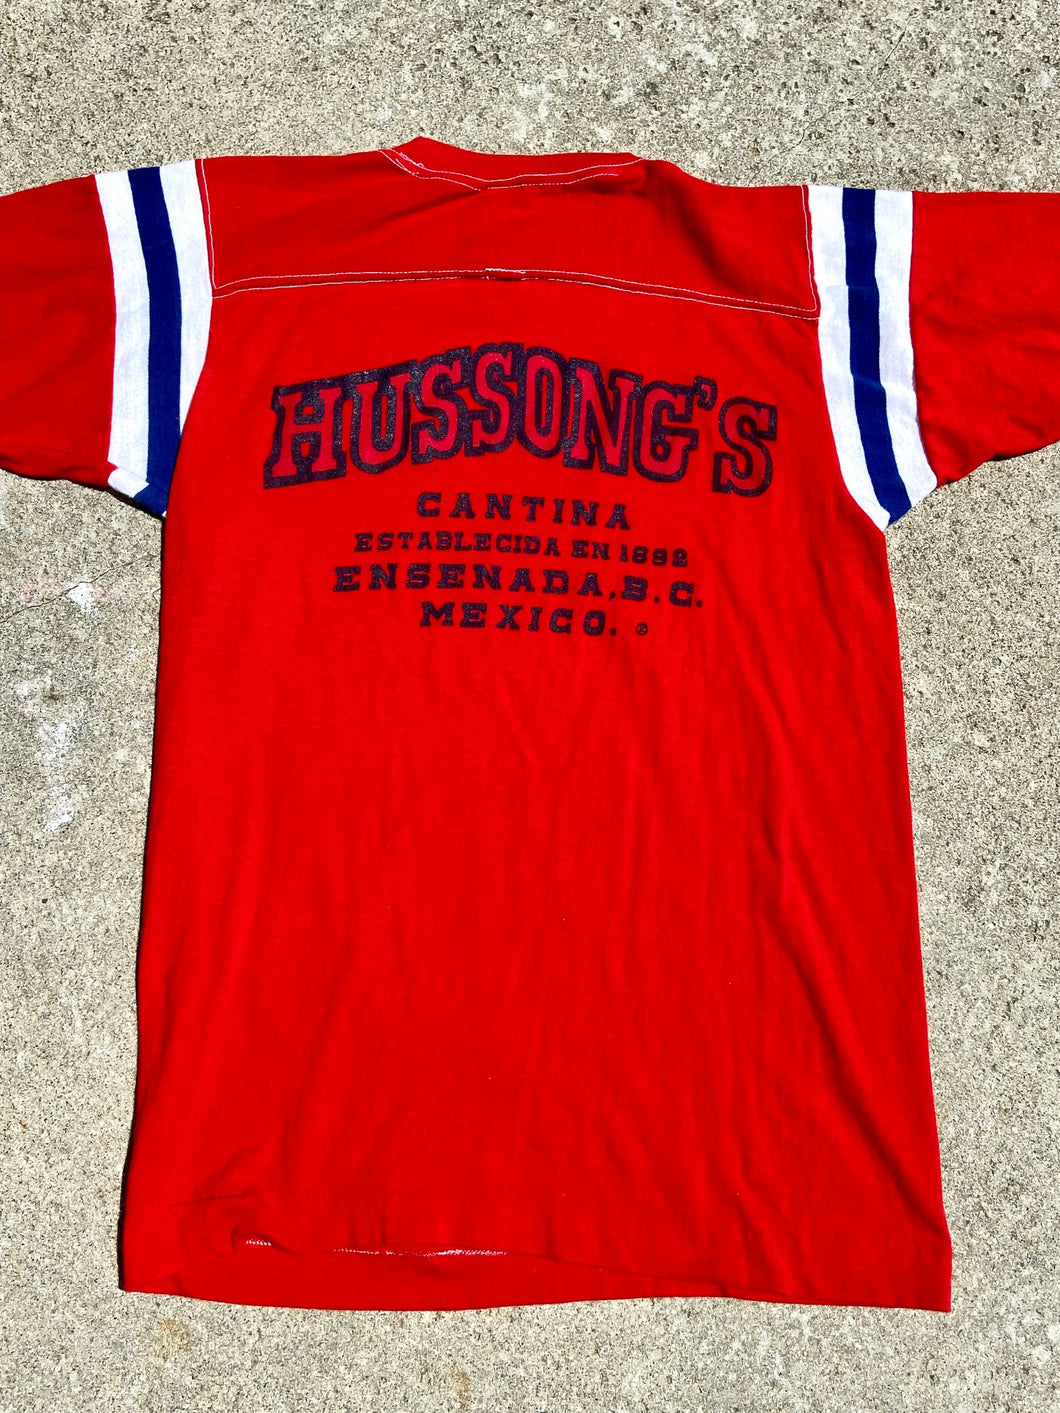 Super rare vintage 1970s or early 80s Hussong's Ensenada Baseball shirt. Size XL but fits more like a large.